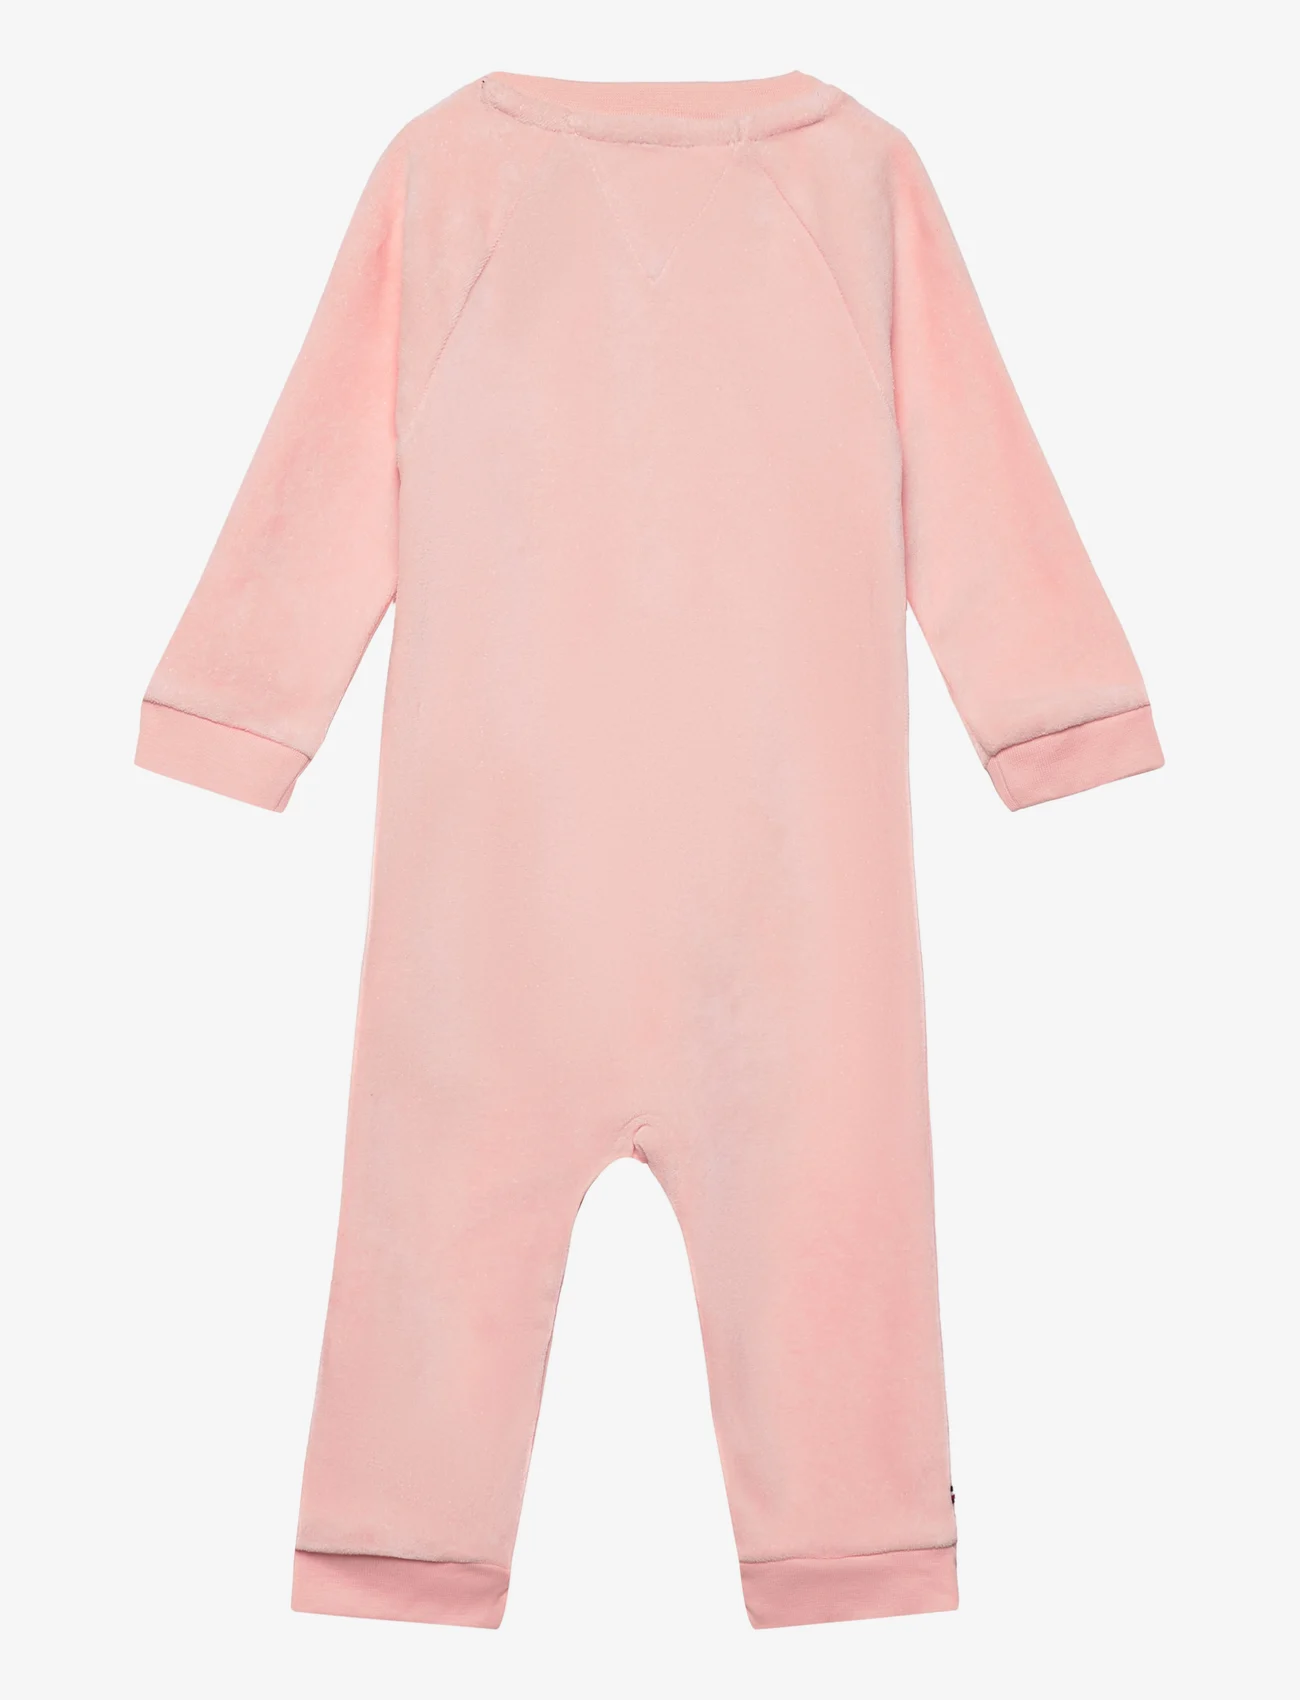 Tommy Hilfiger - BABY CURVED MONOTYPE COVERALL - langærmede - pink crystal - 1